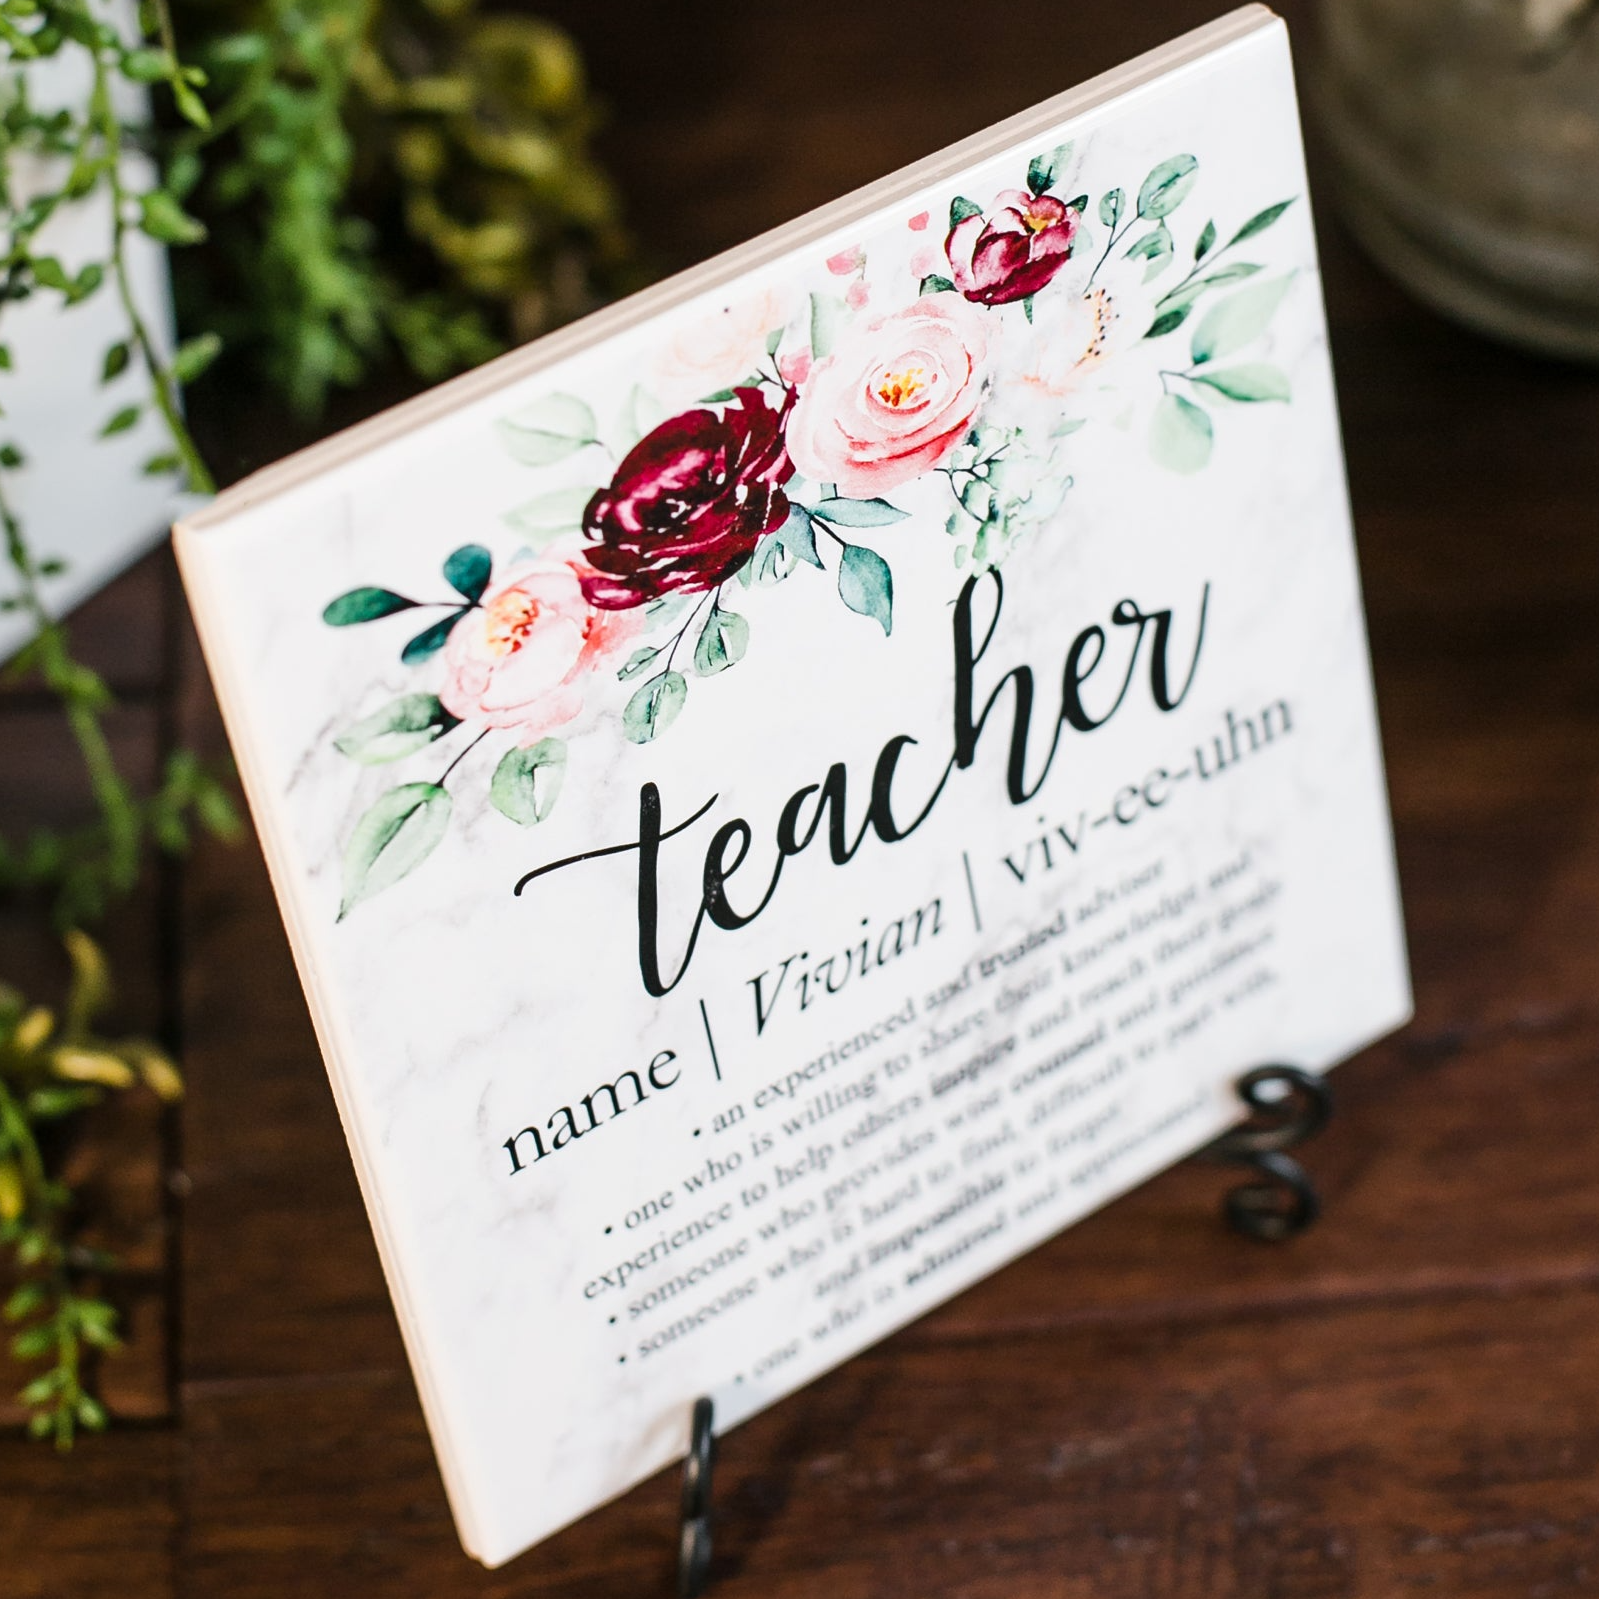 a sign that says teacher next to a potted plant